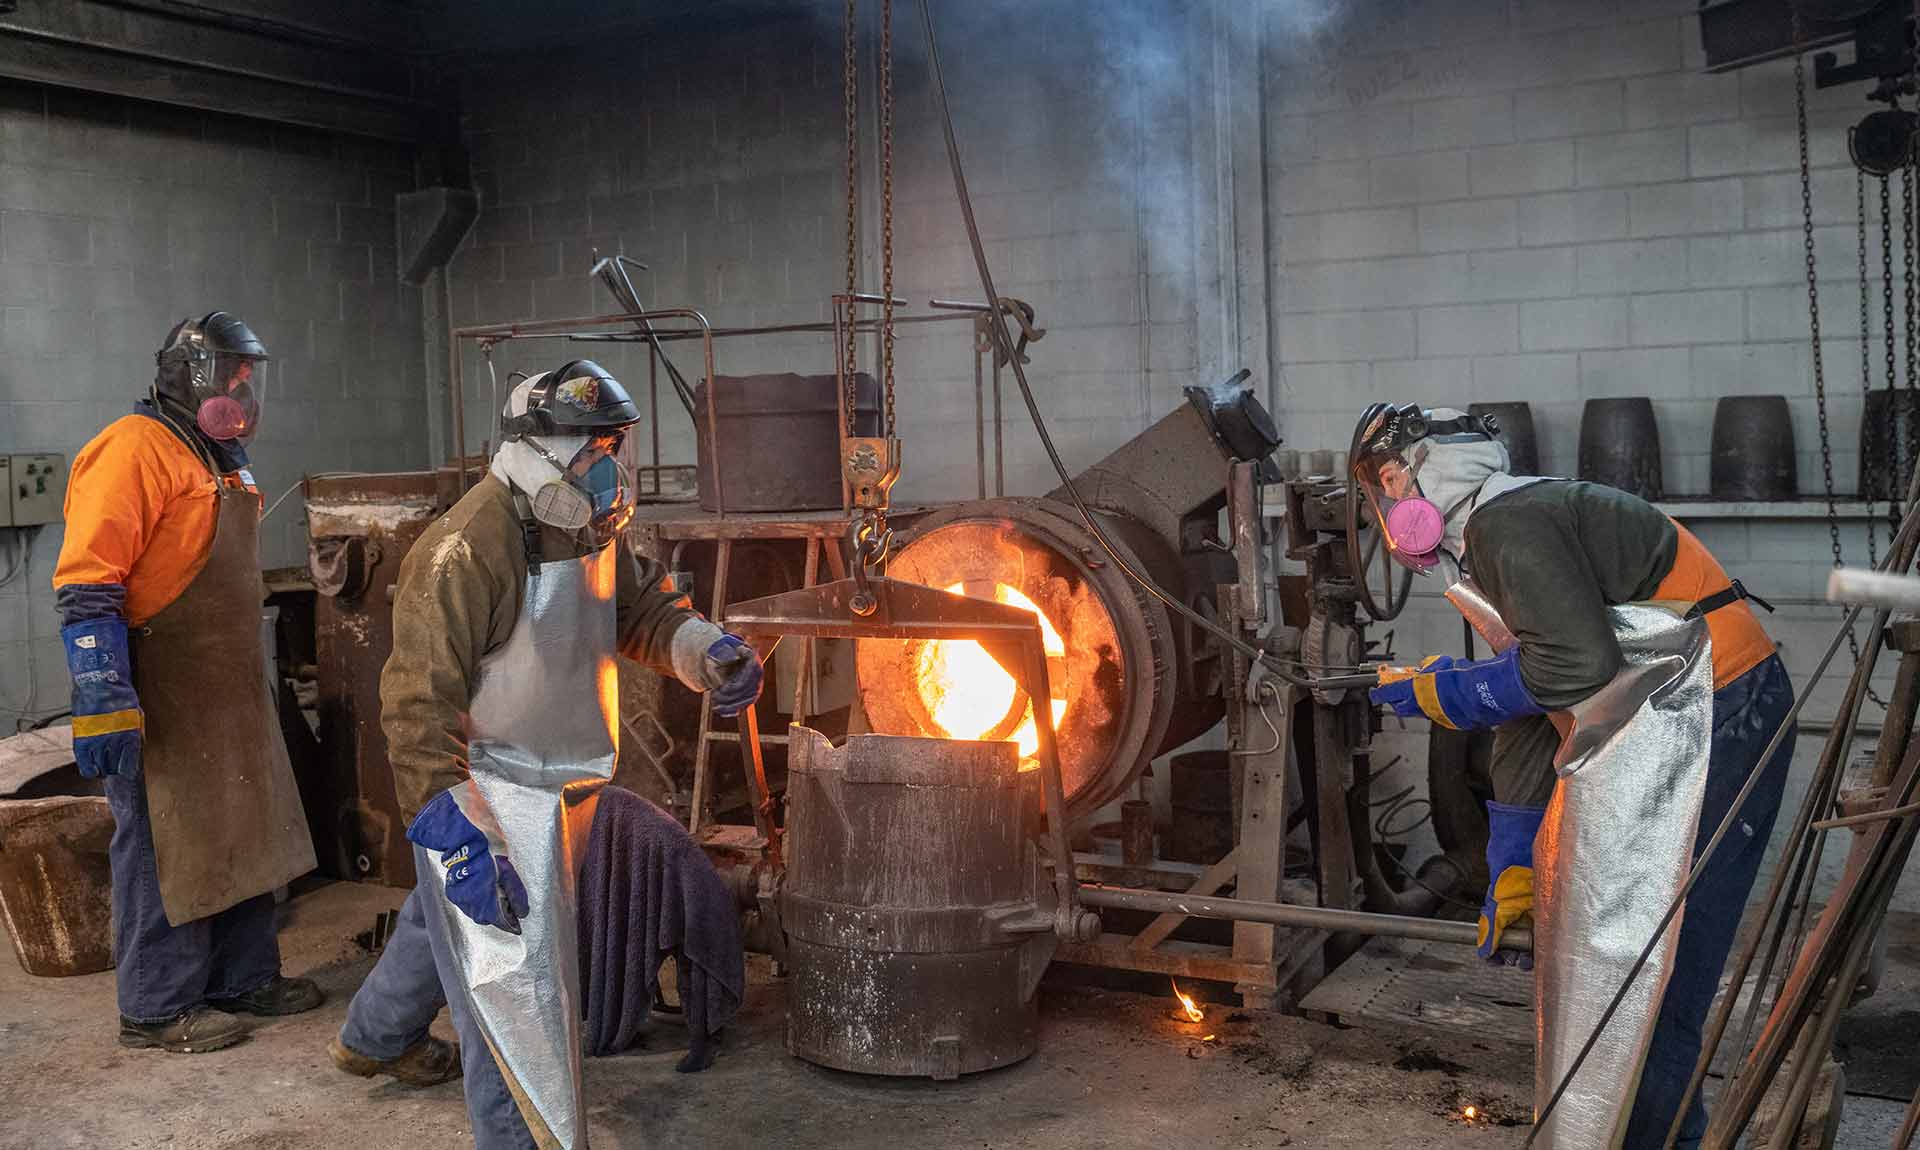 Pouring the moulten bronze into the crucible